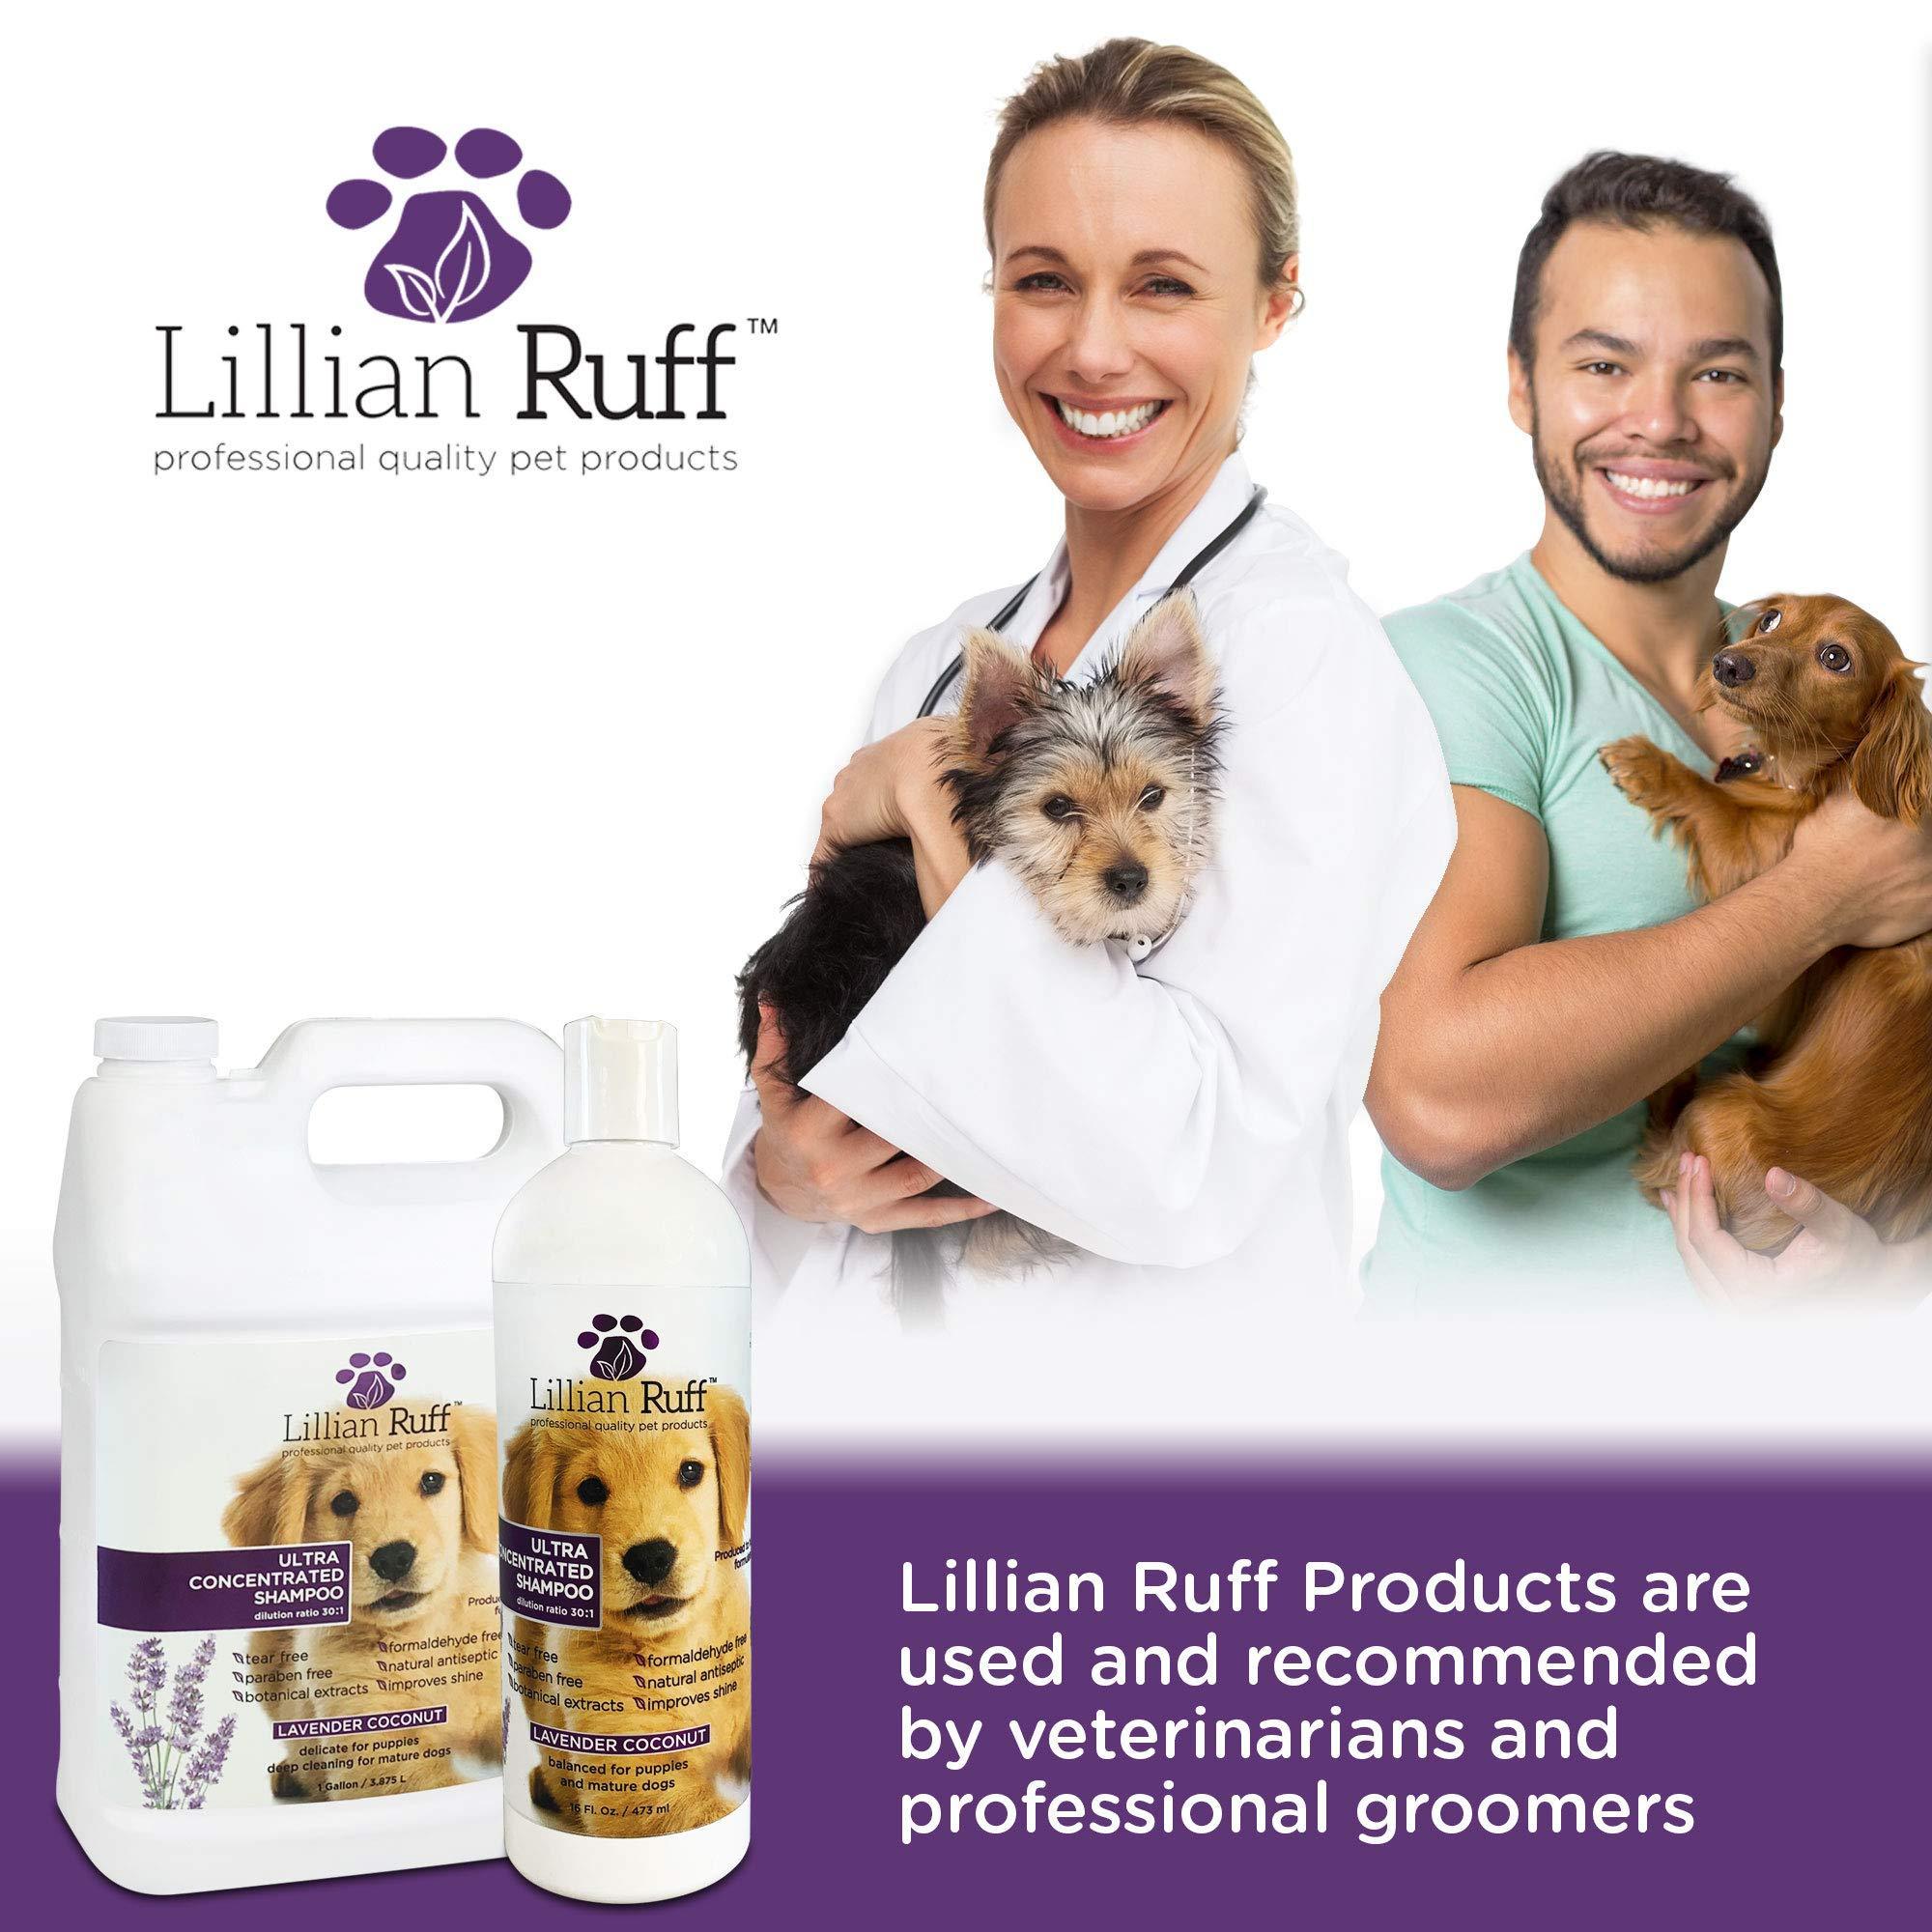 Ultra Concentrated Shampoo - Lillian Ruff-LR-ULTRACONCENTRATE16OZ-FBA